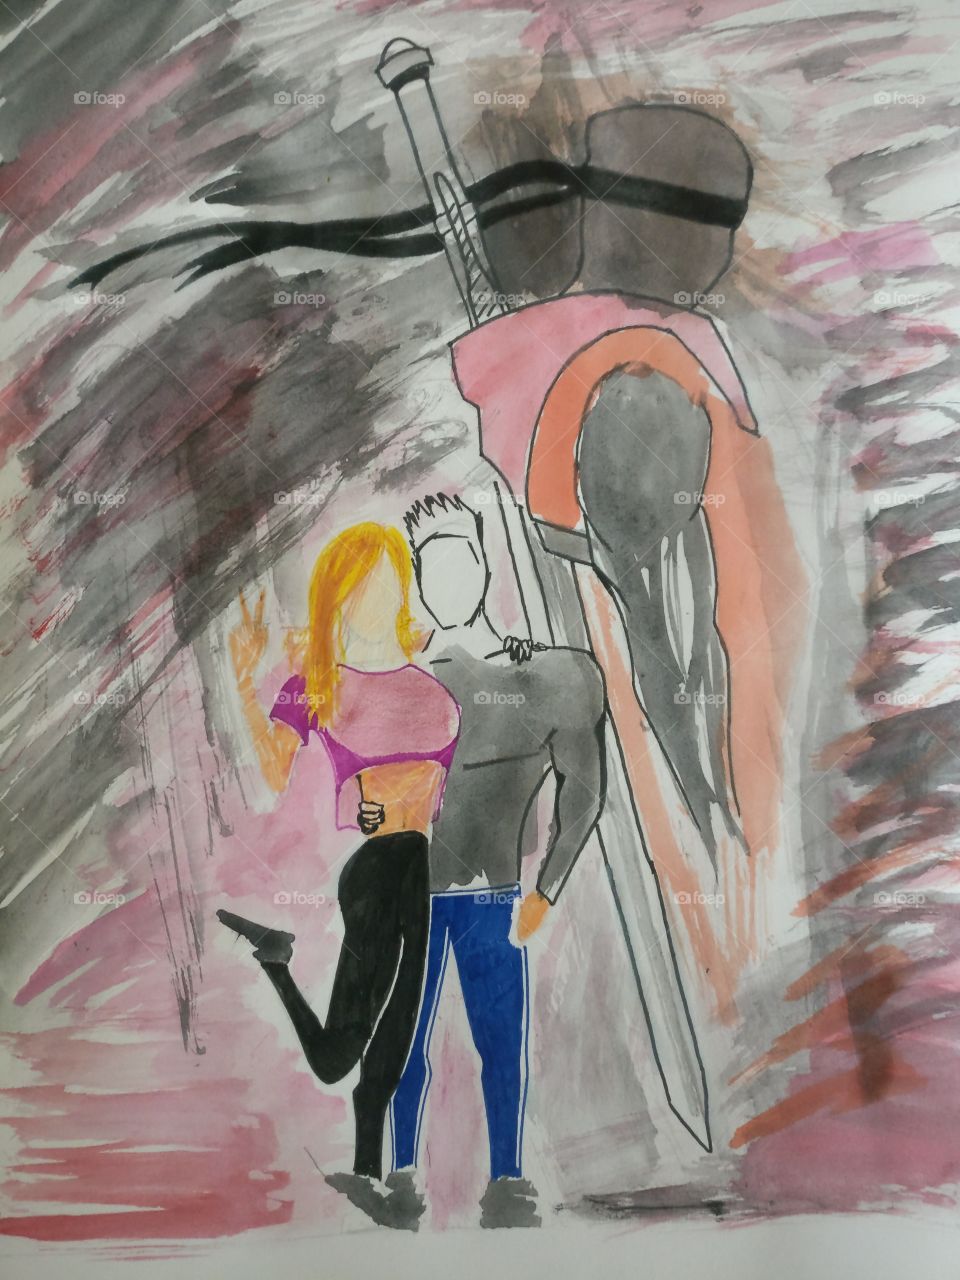 its just a drawing by a 9 y/o kid